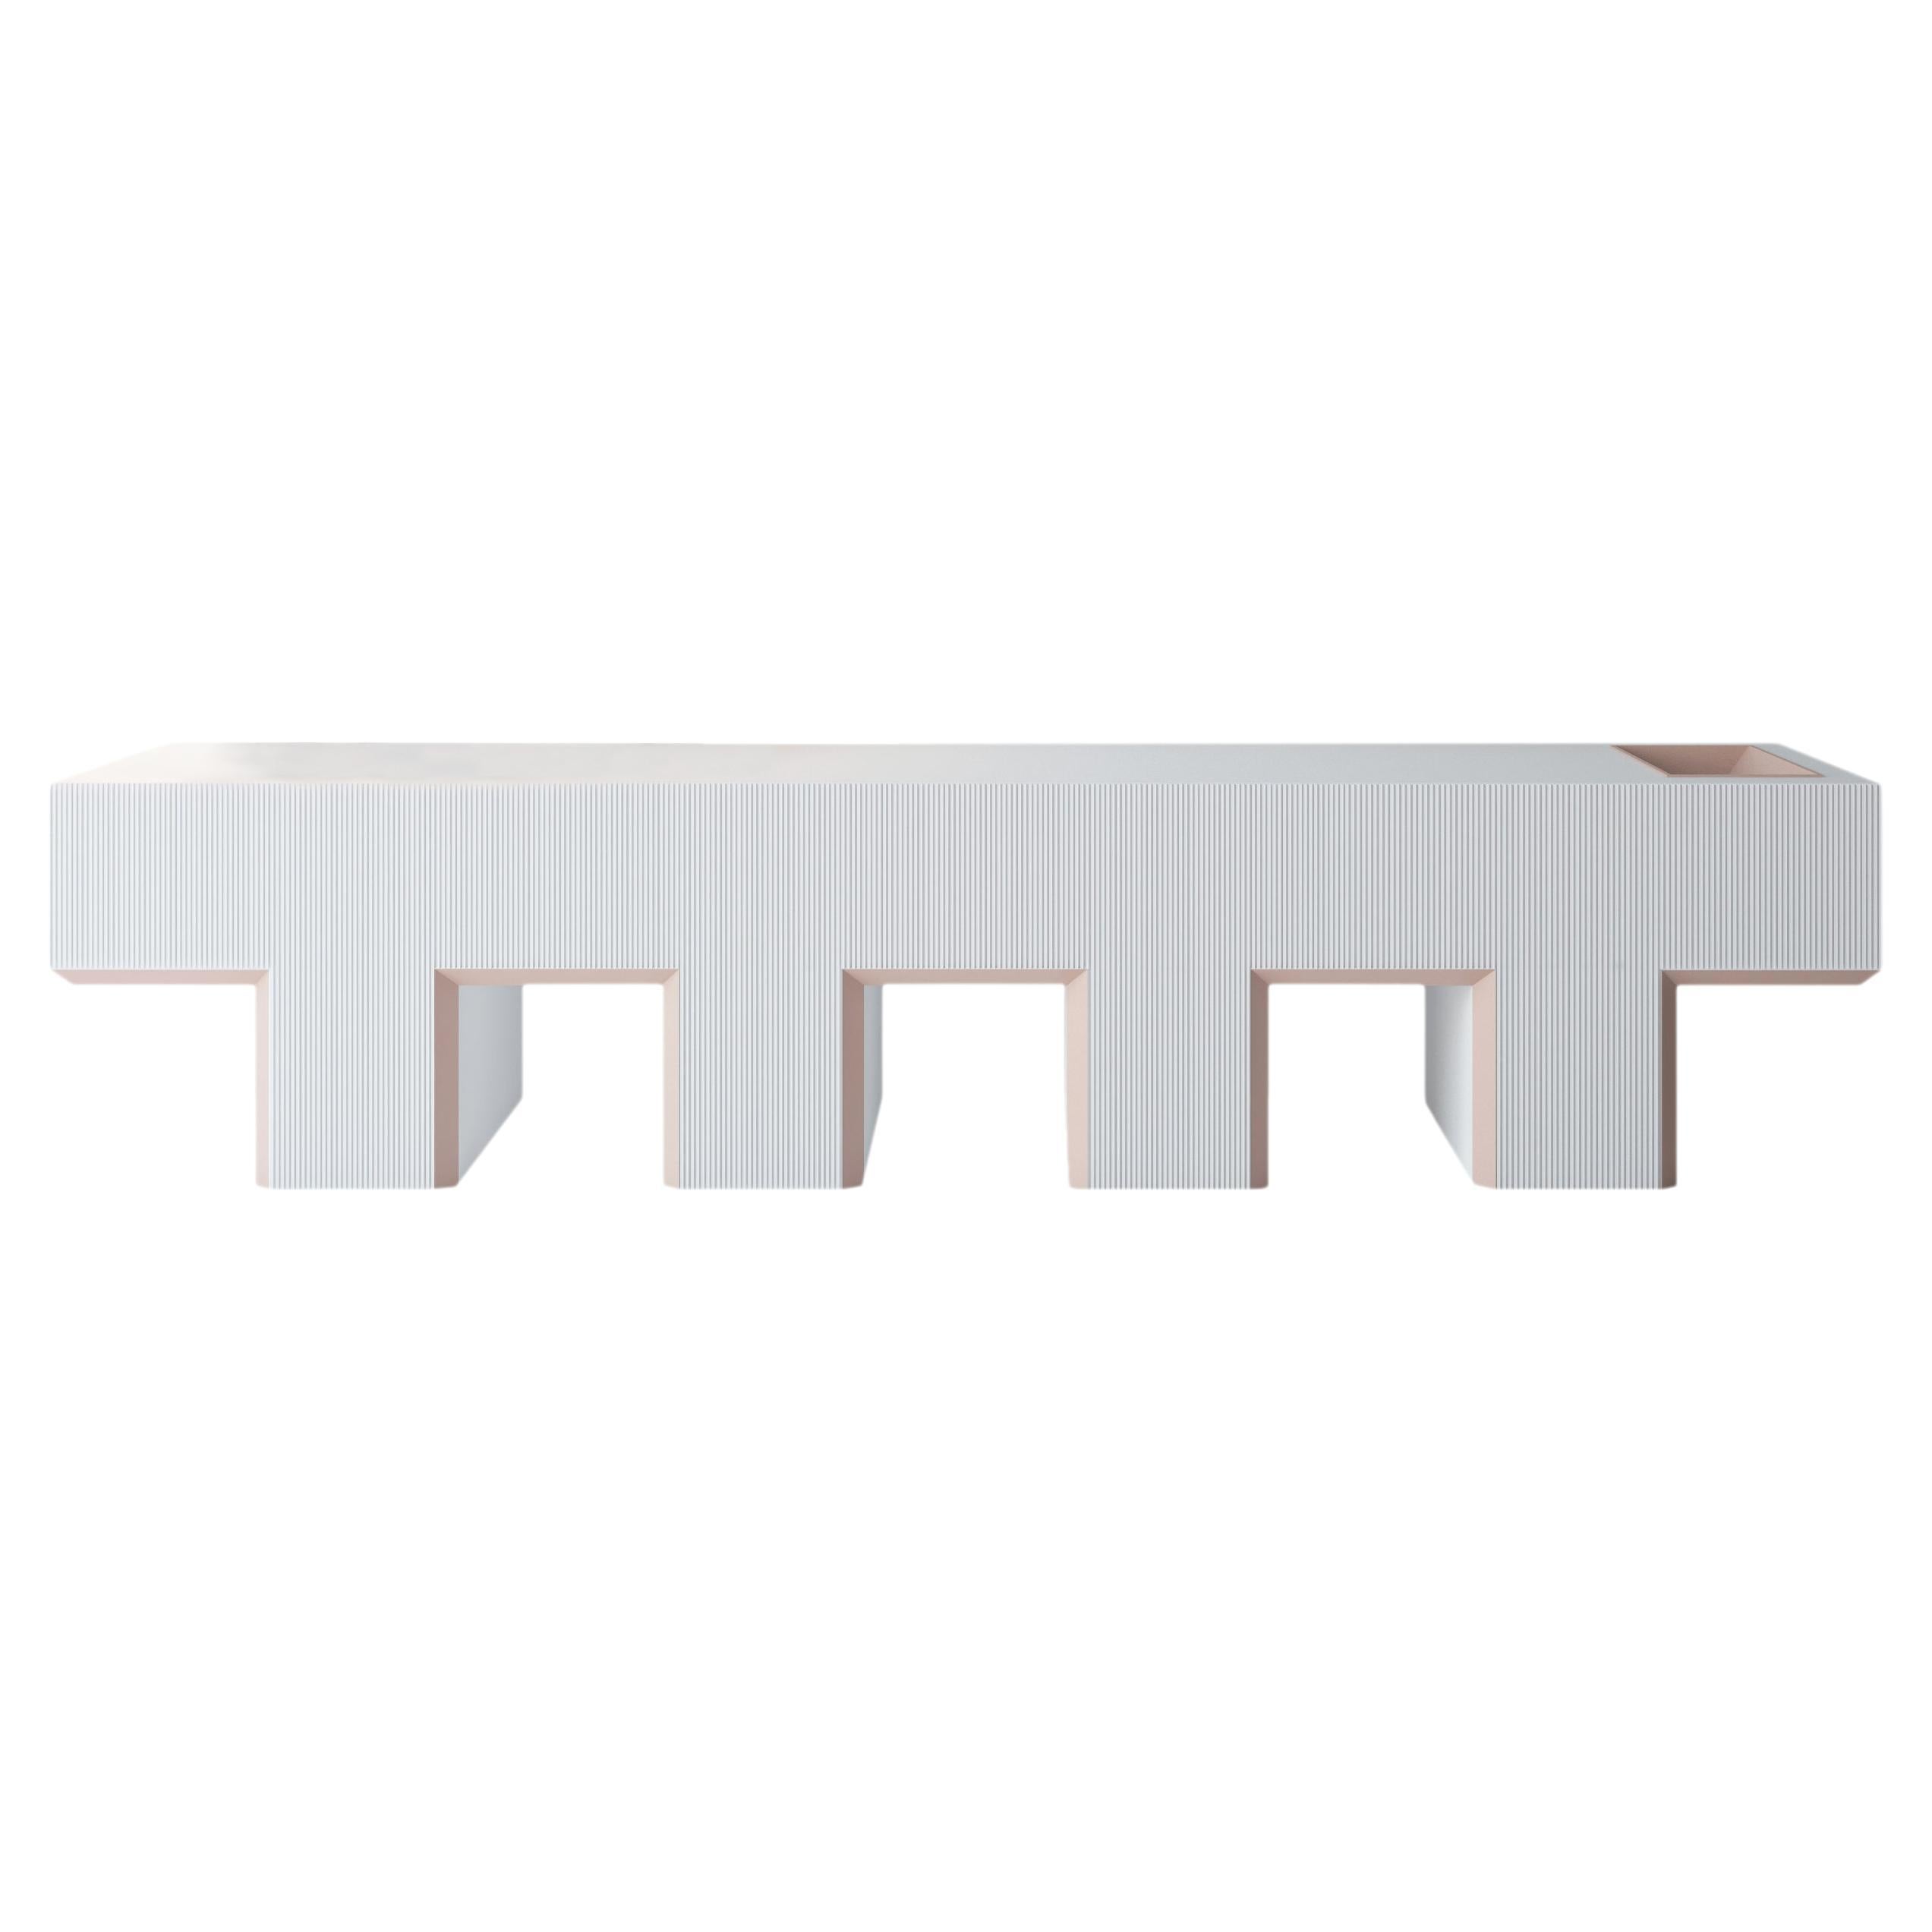 Lego Bench with a Storage Slot, White For Sale